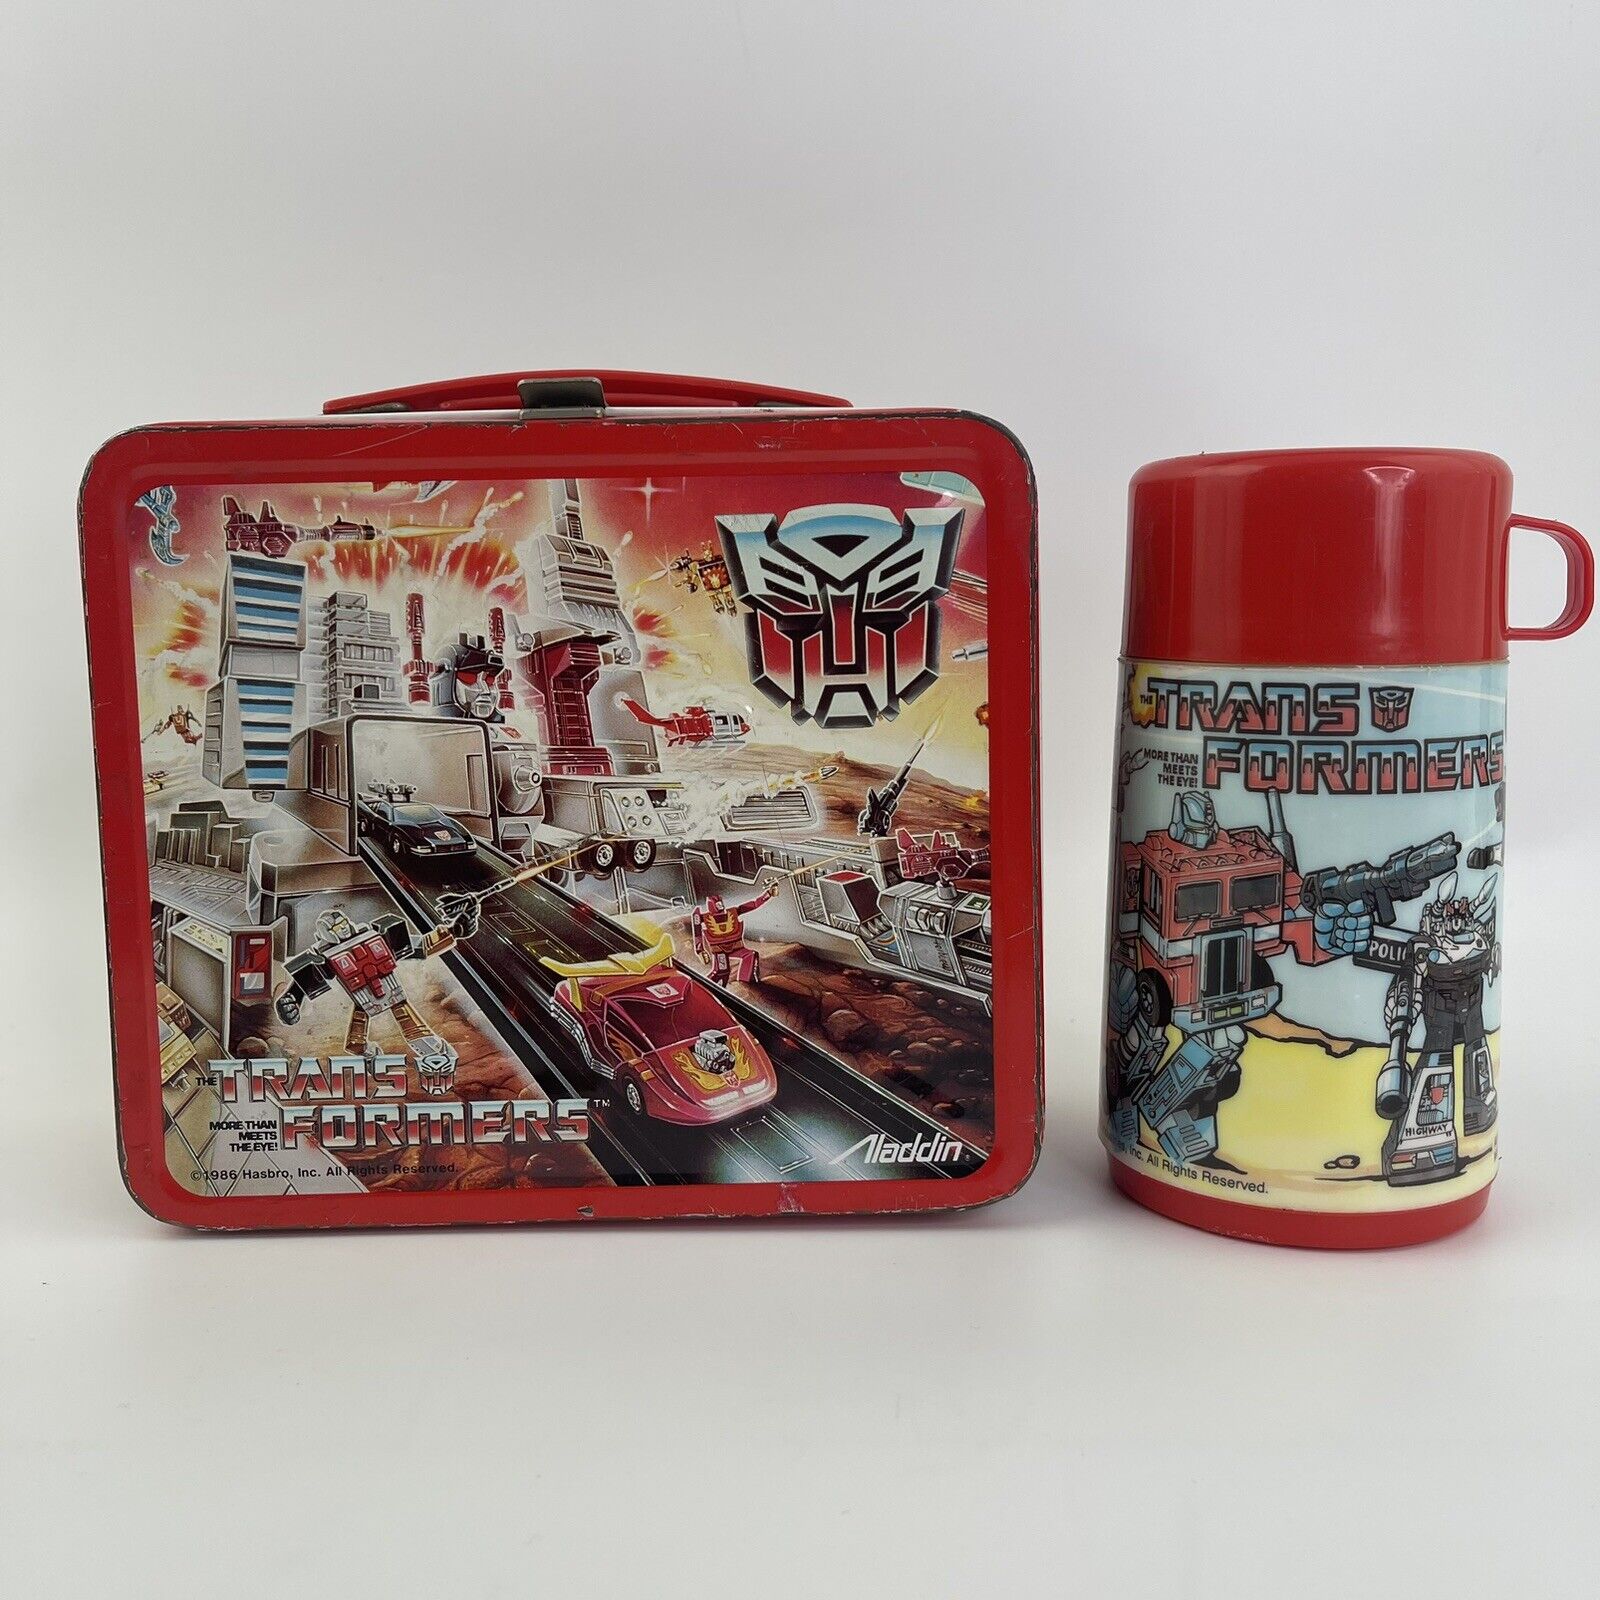 Vintage Transformers 1986 Red Hasbro Aladdin Lunch Box With Thermos